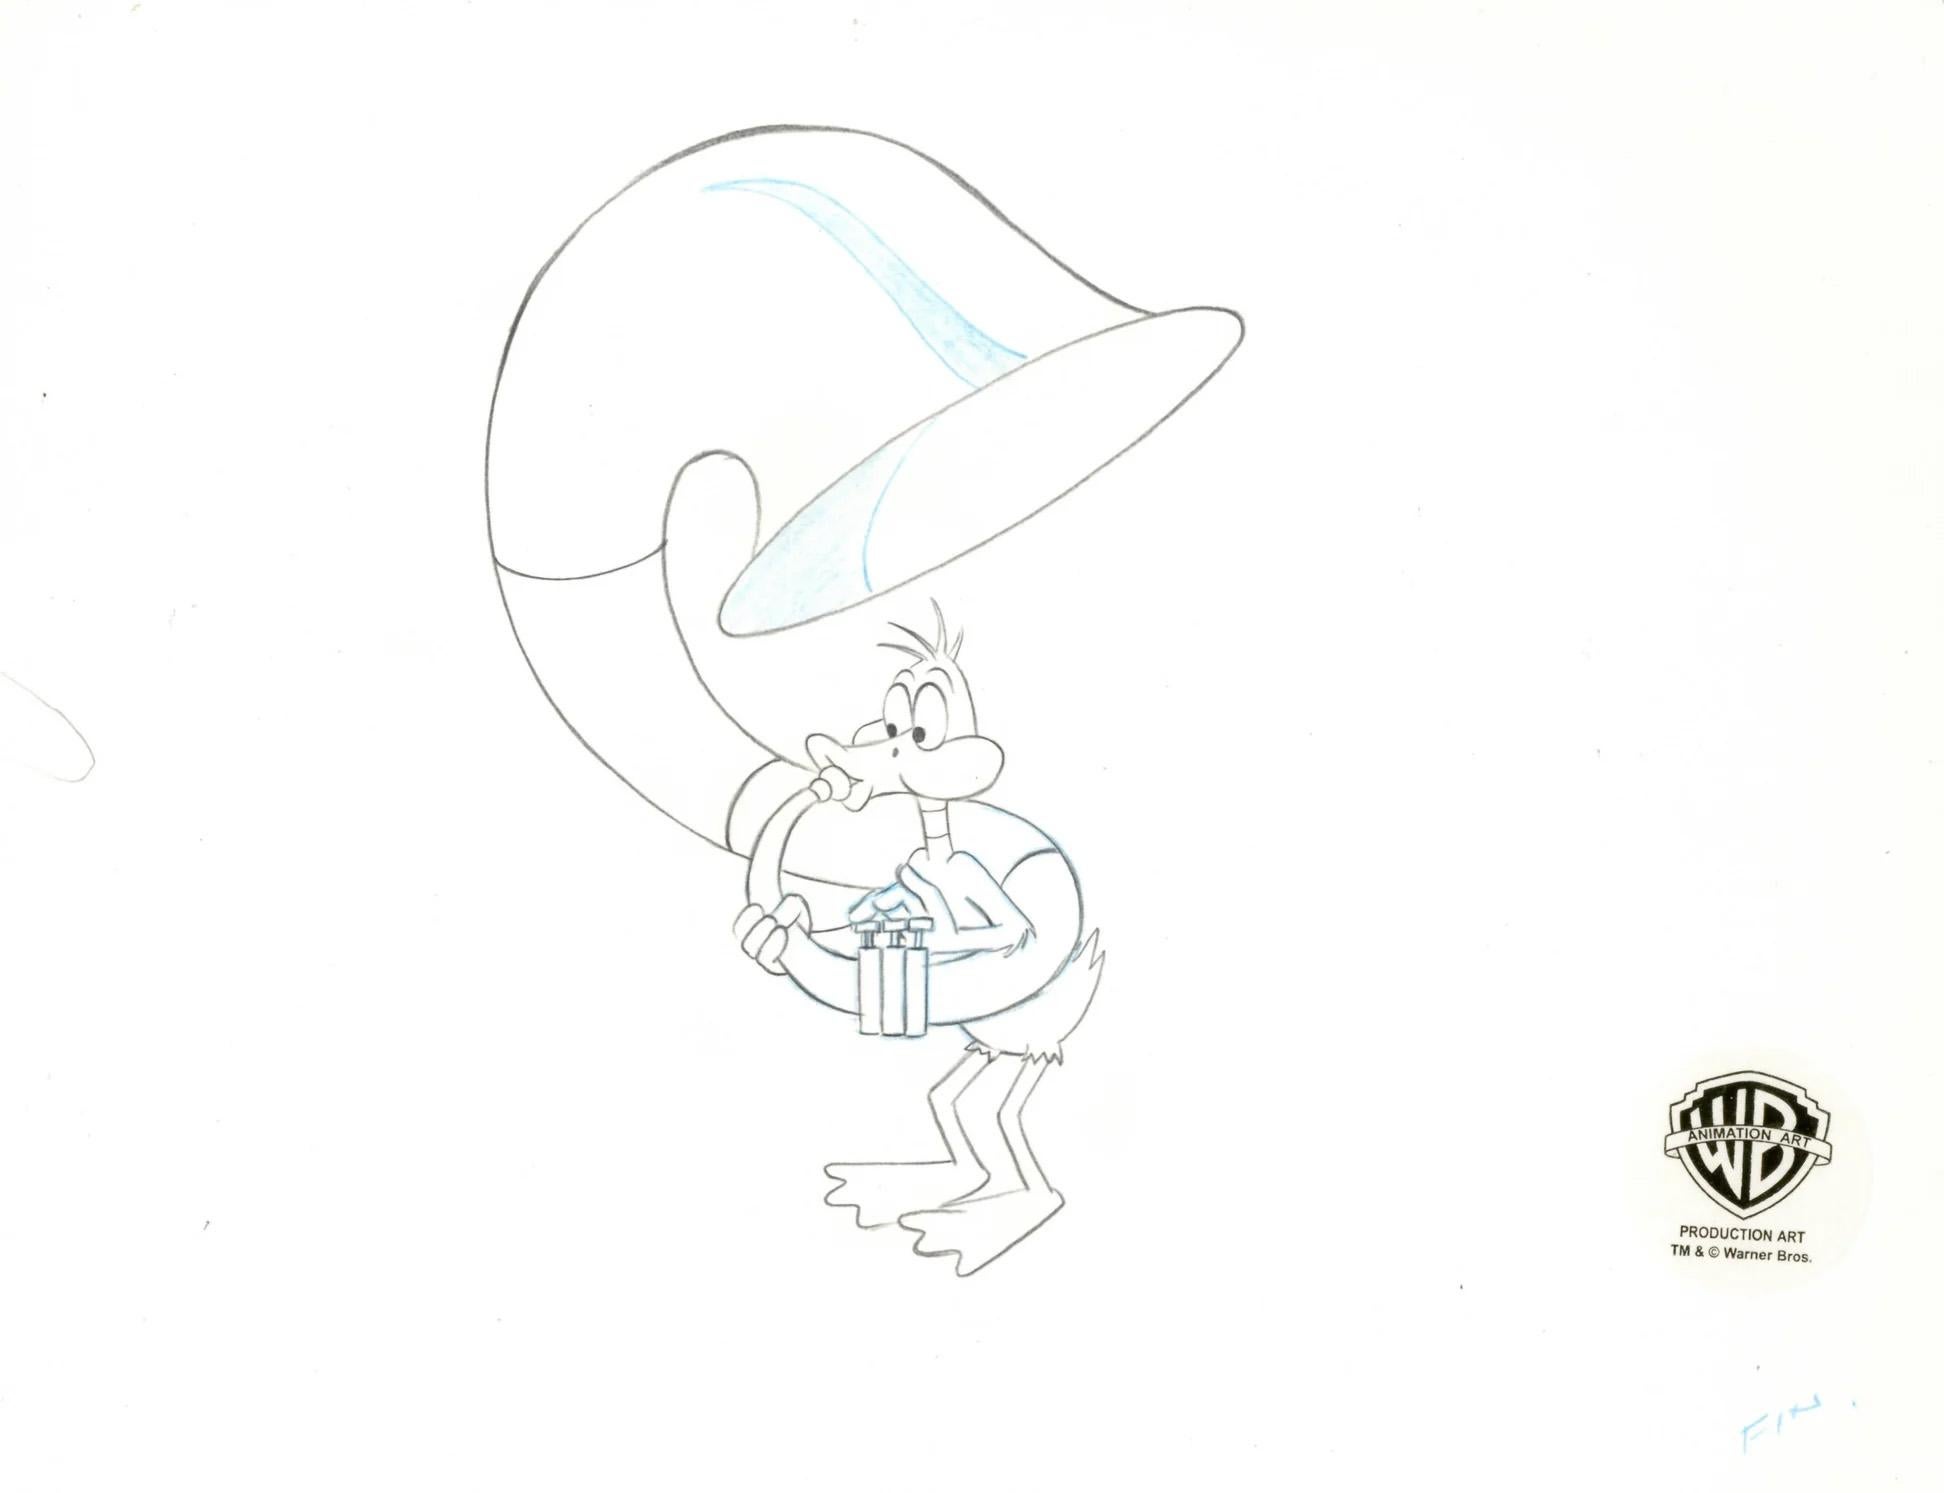 Looney Tunes Original Production Drawing: Daffy Duck - Art by Looney Tunes Studio Artists